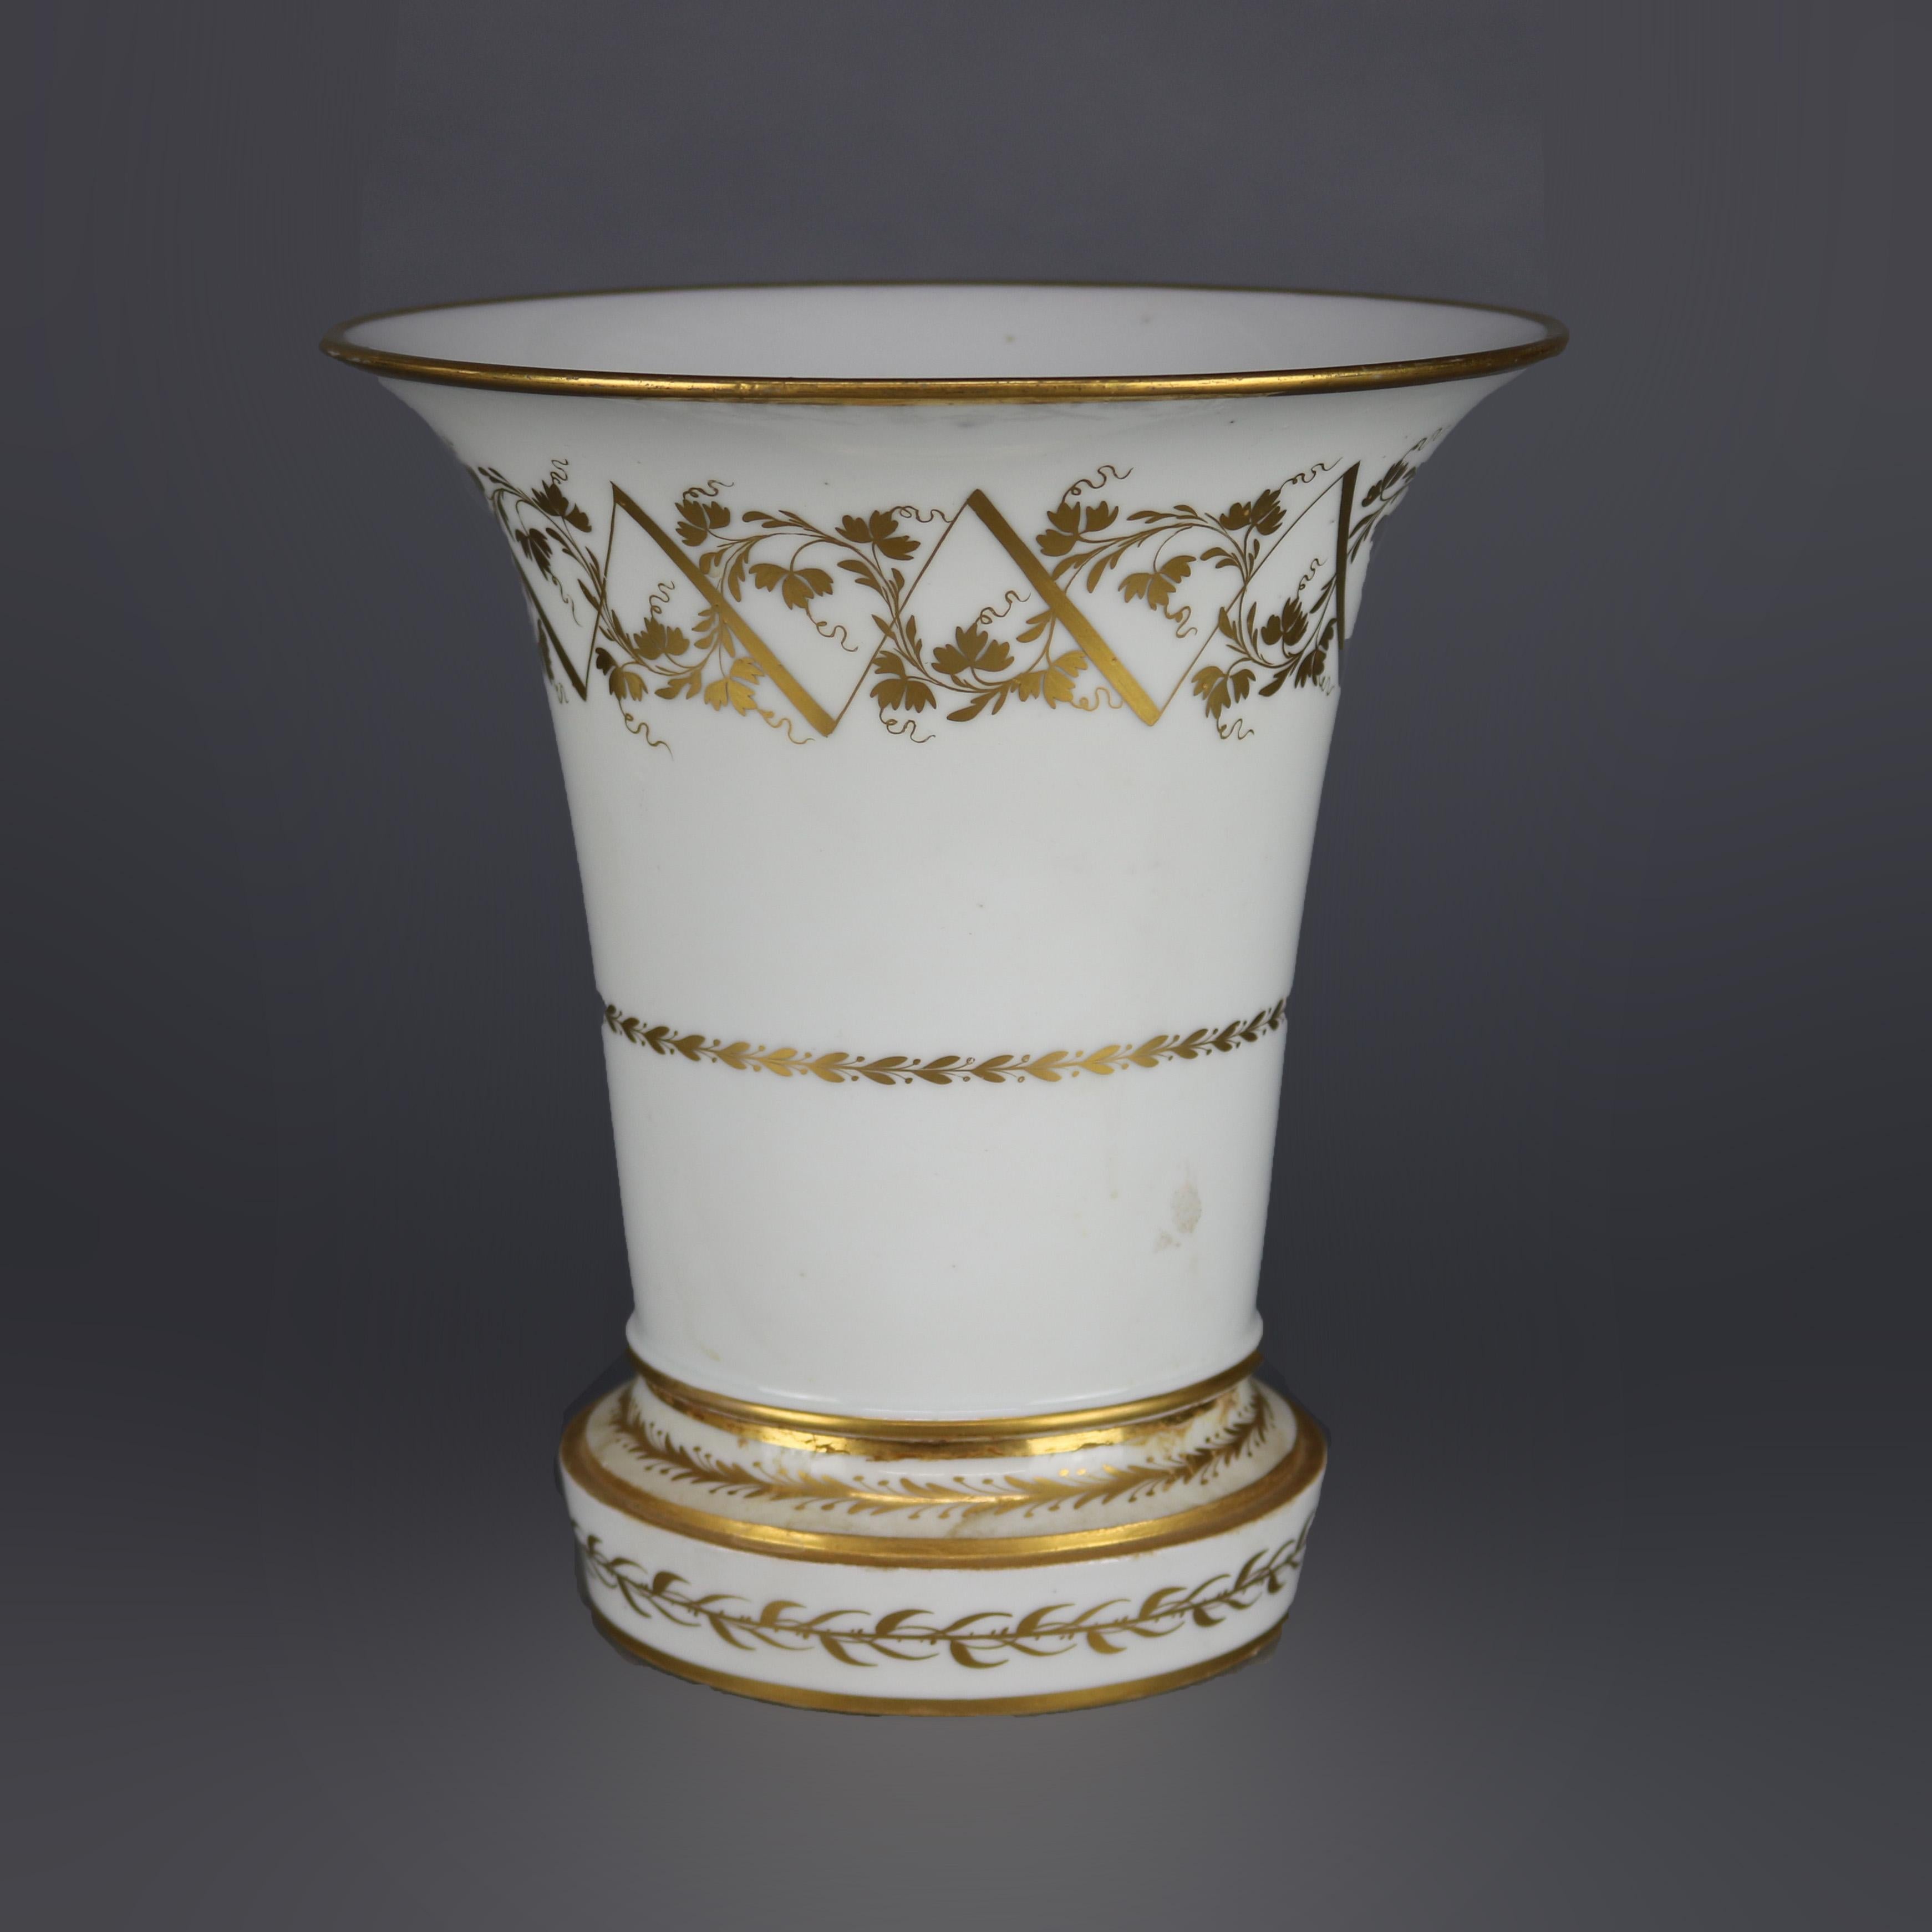 An antique oversized Neoclassical porcelain garniture set offers paint and gilt decorated Austrian Royal Vienna central urn with reticulated lid and raised on three convex legs, beehive maker mark on base as photographed; flanking gilt decorated